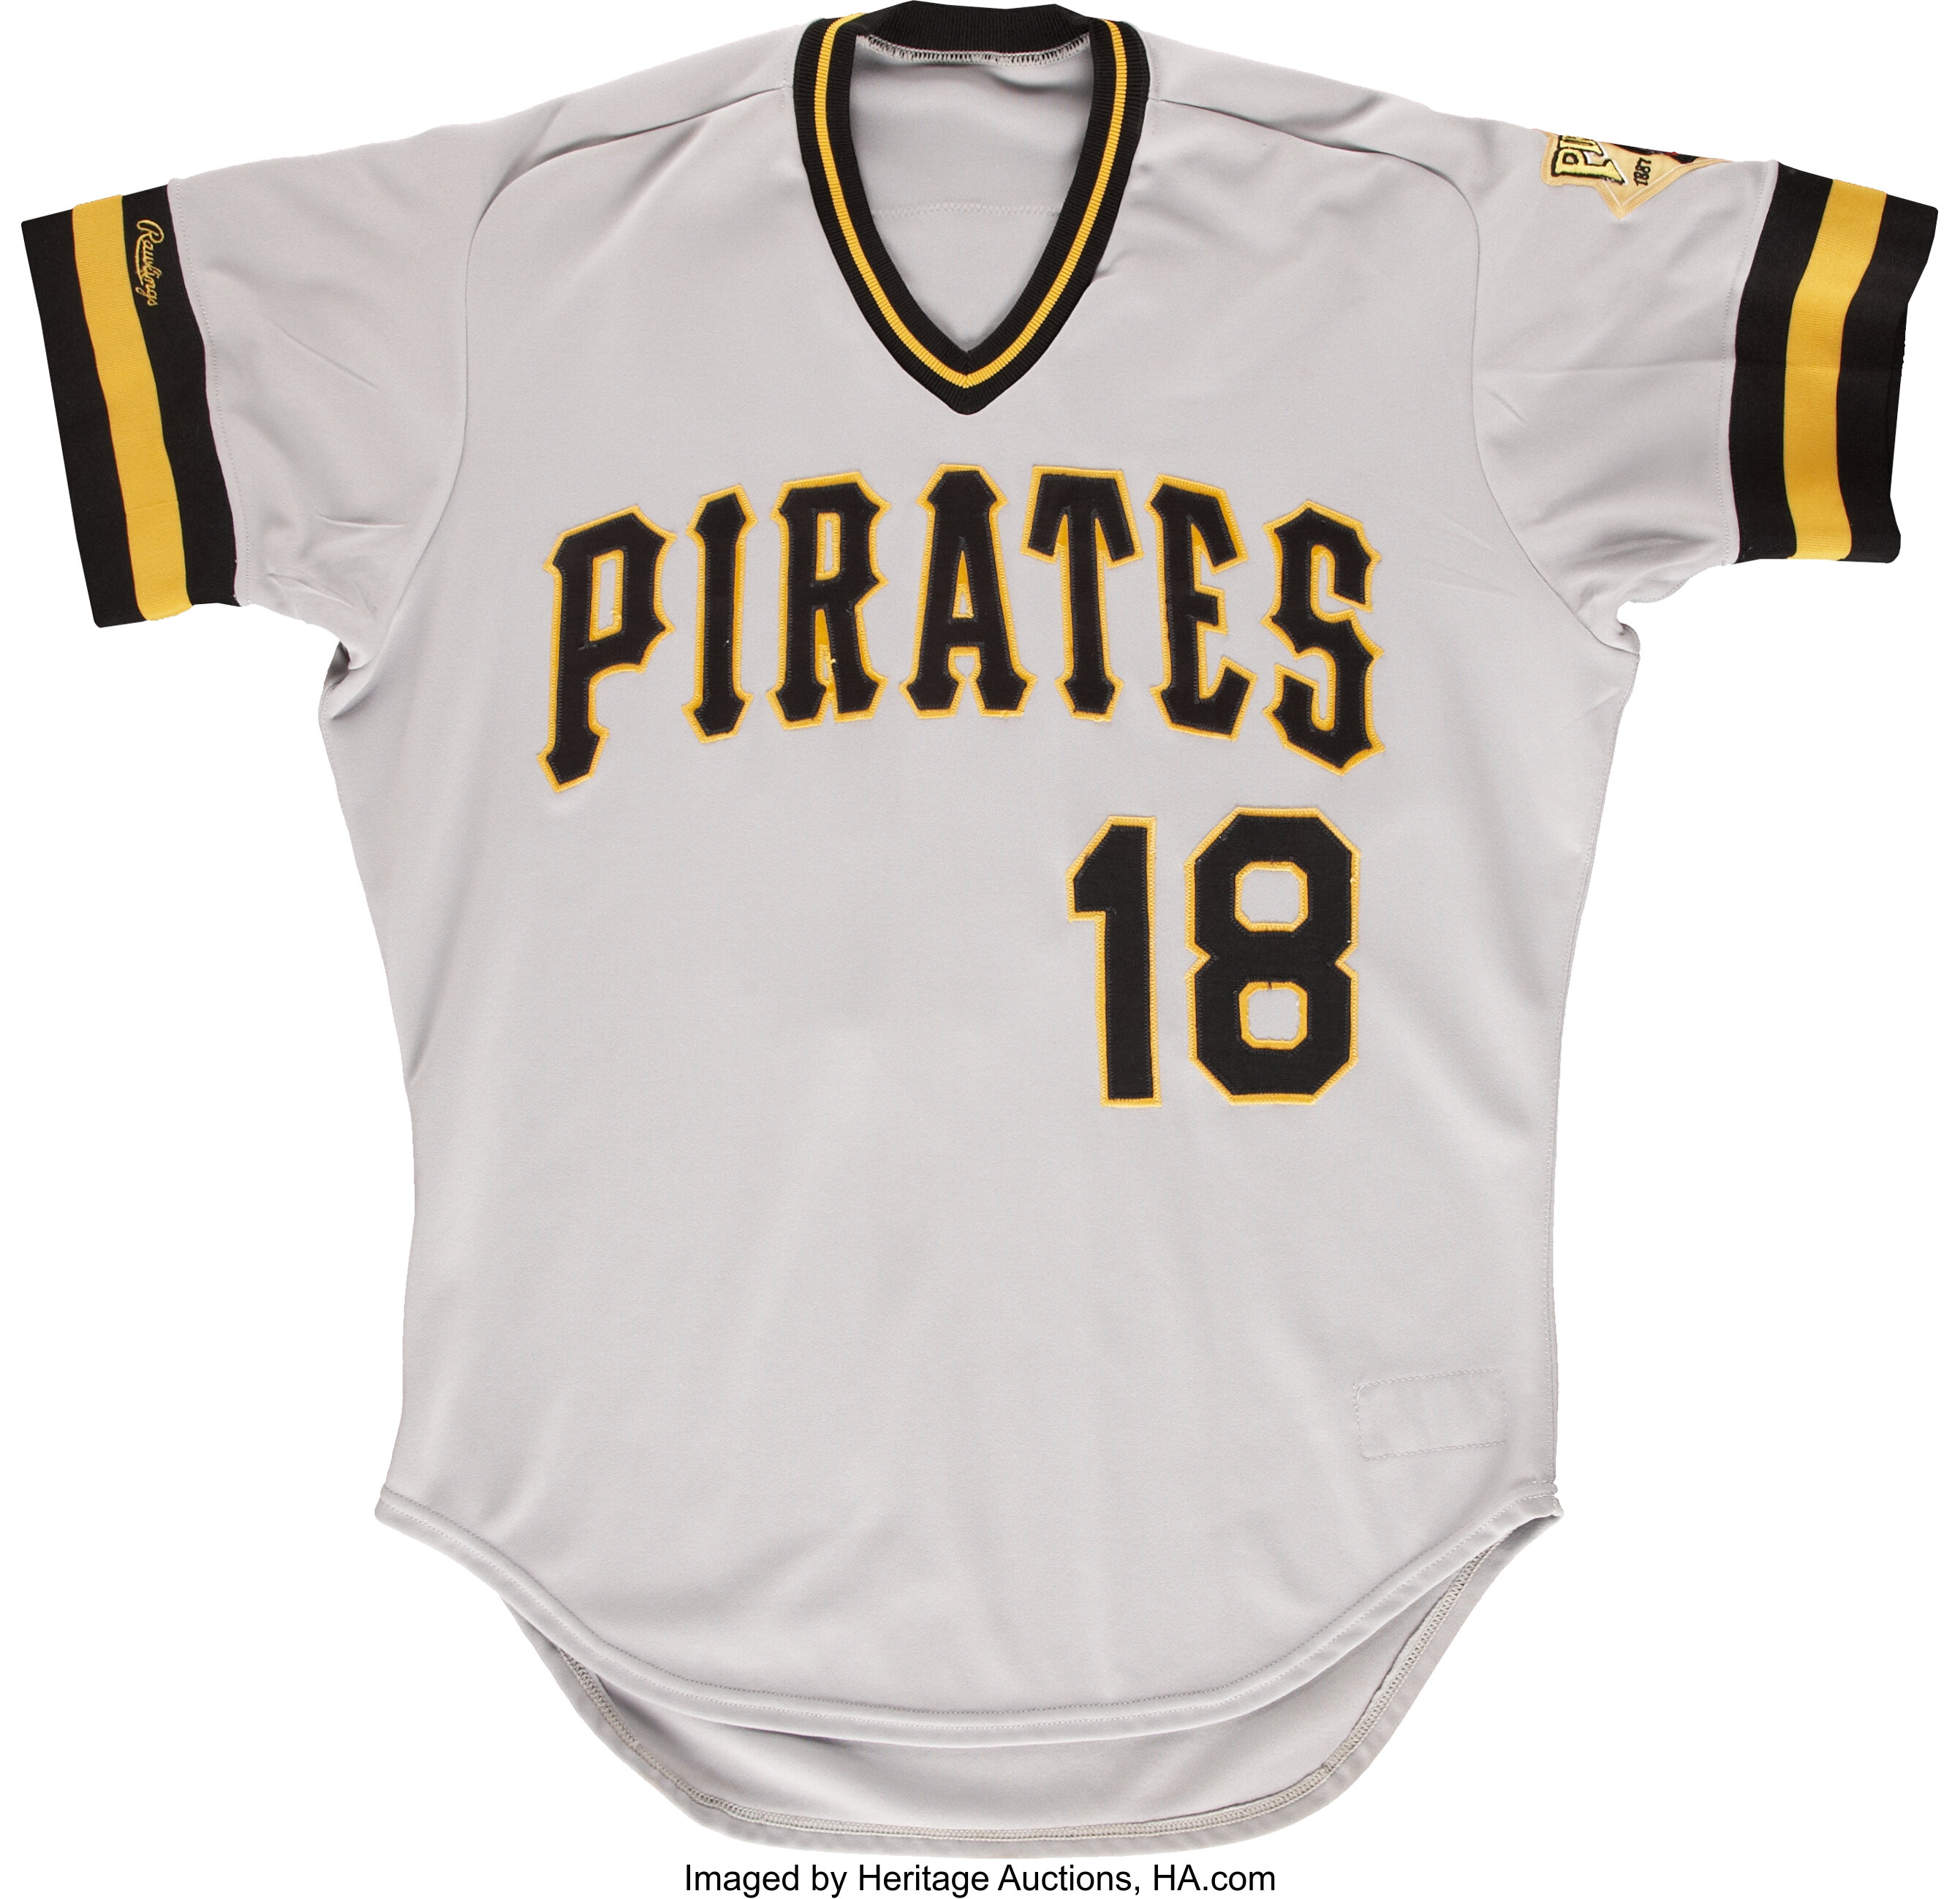 Burgh's Best to Wear It, No. 18: Andy Van Slyke was at center of